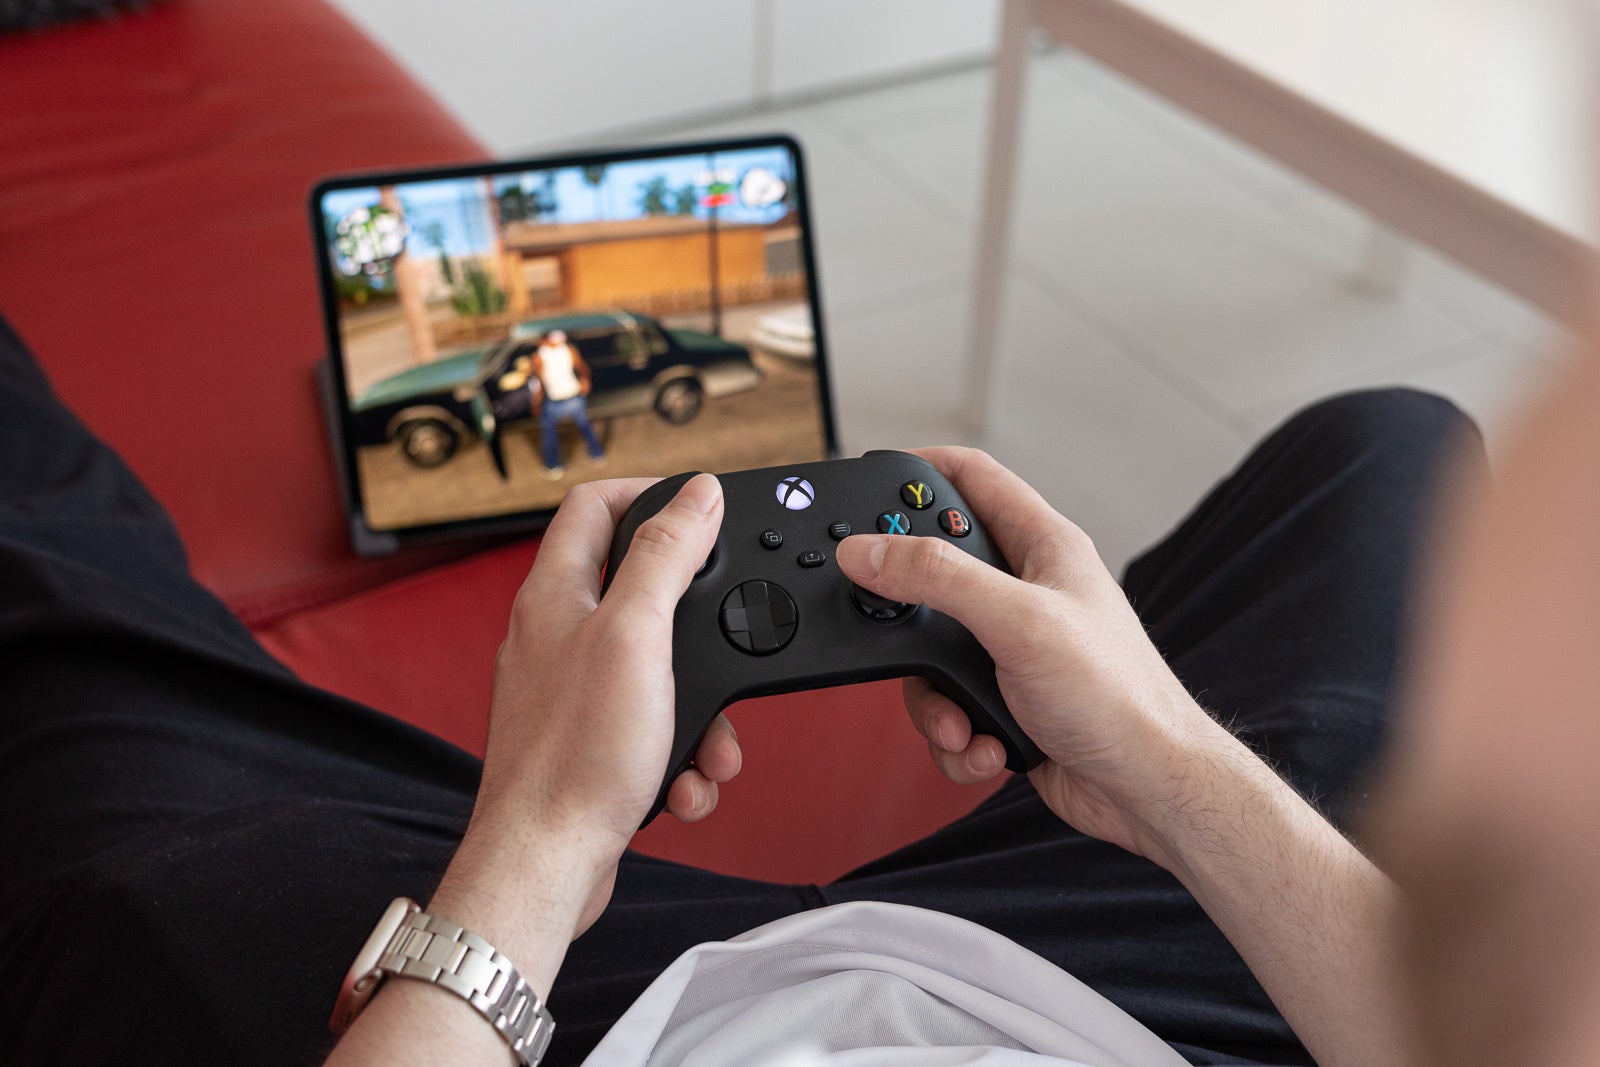 It's not iPadOS, Android, Chrome OS or even Windows: This is the new thing we need on tablets for gaming